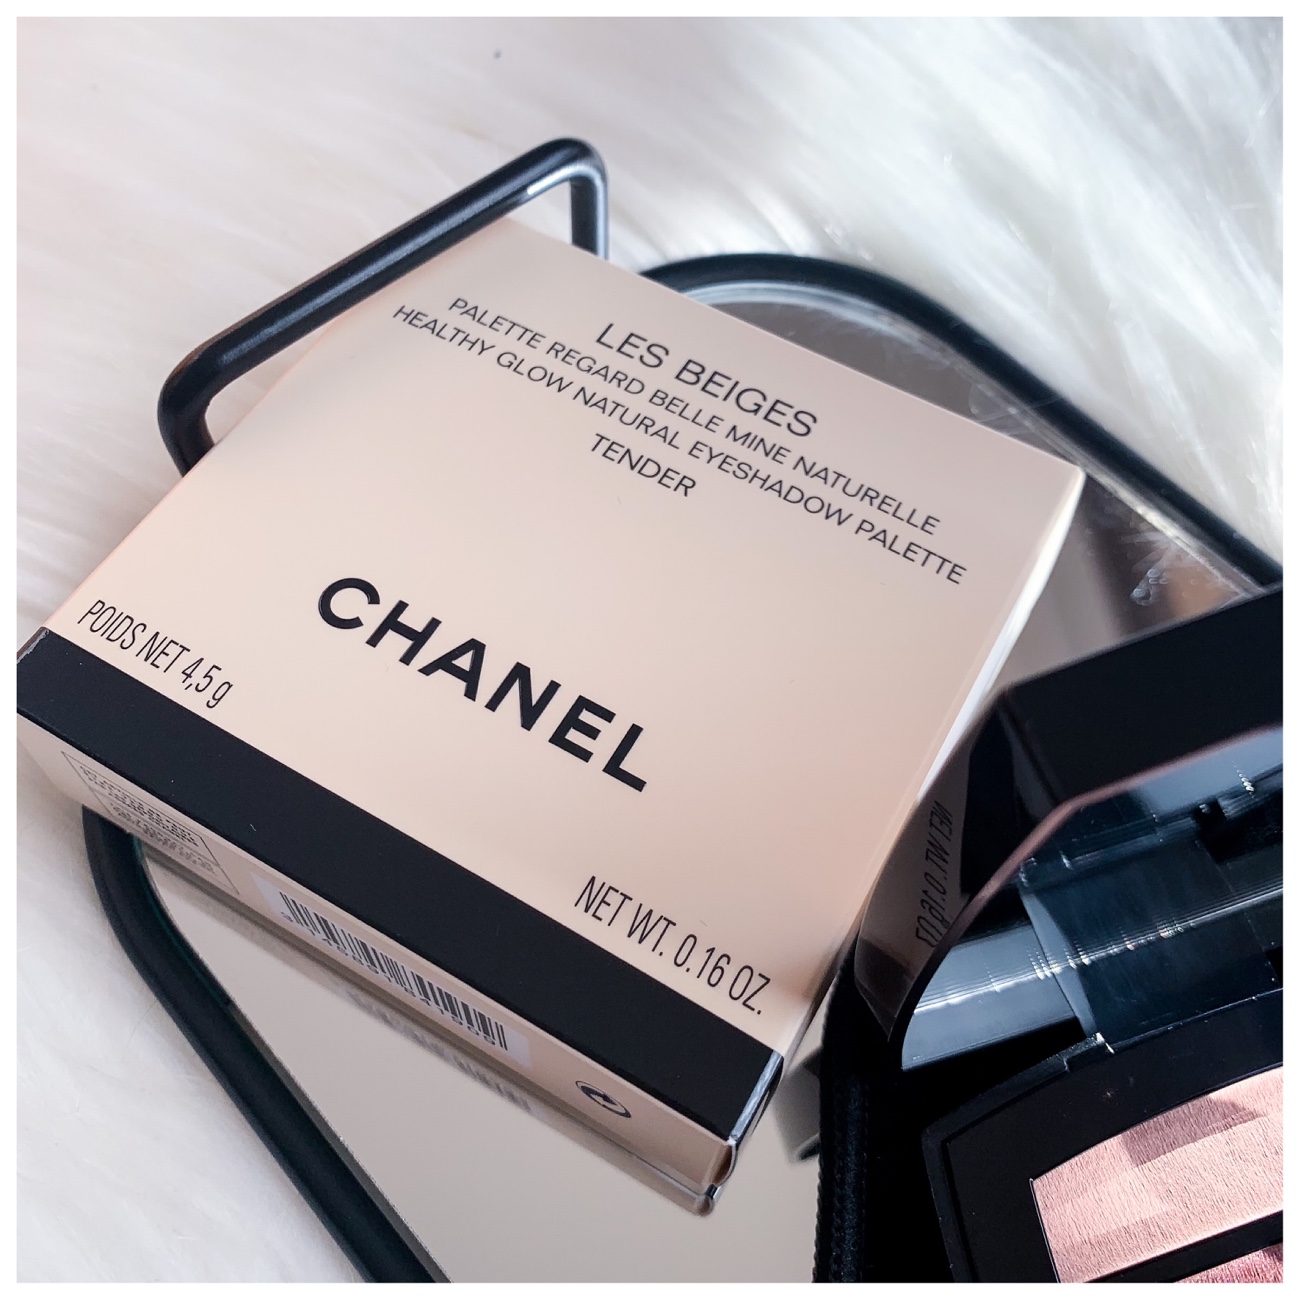 Chanel Les Beiges 2021 Summer Light - Healthy Glow Natural